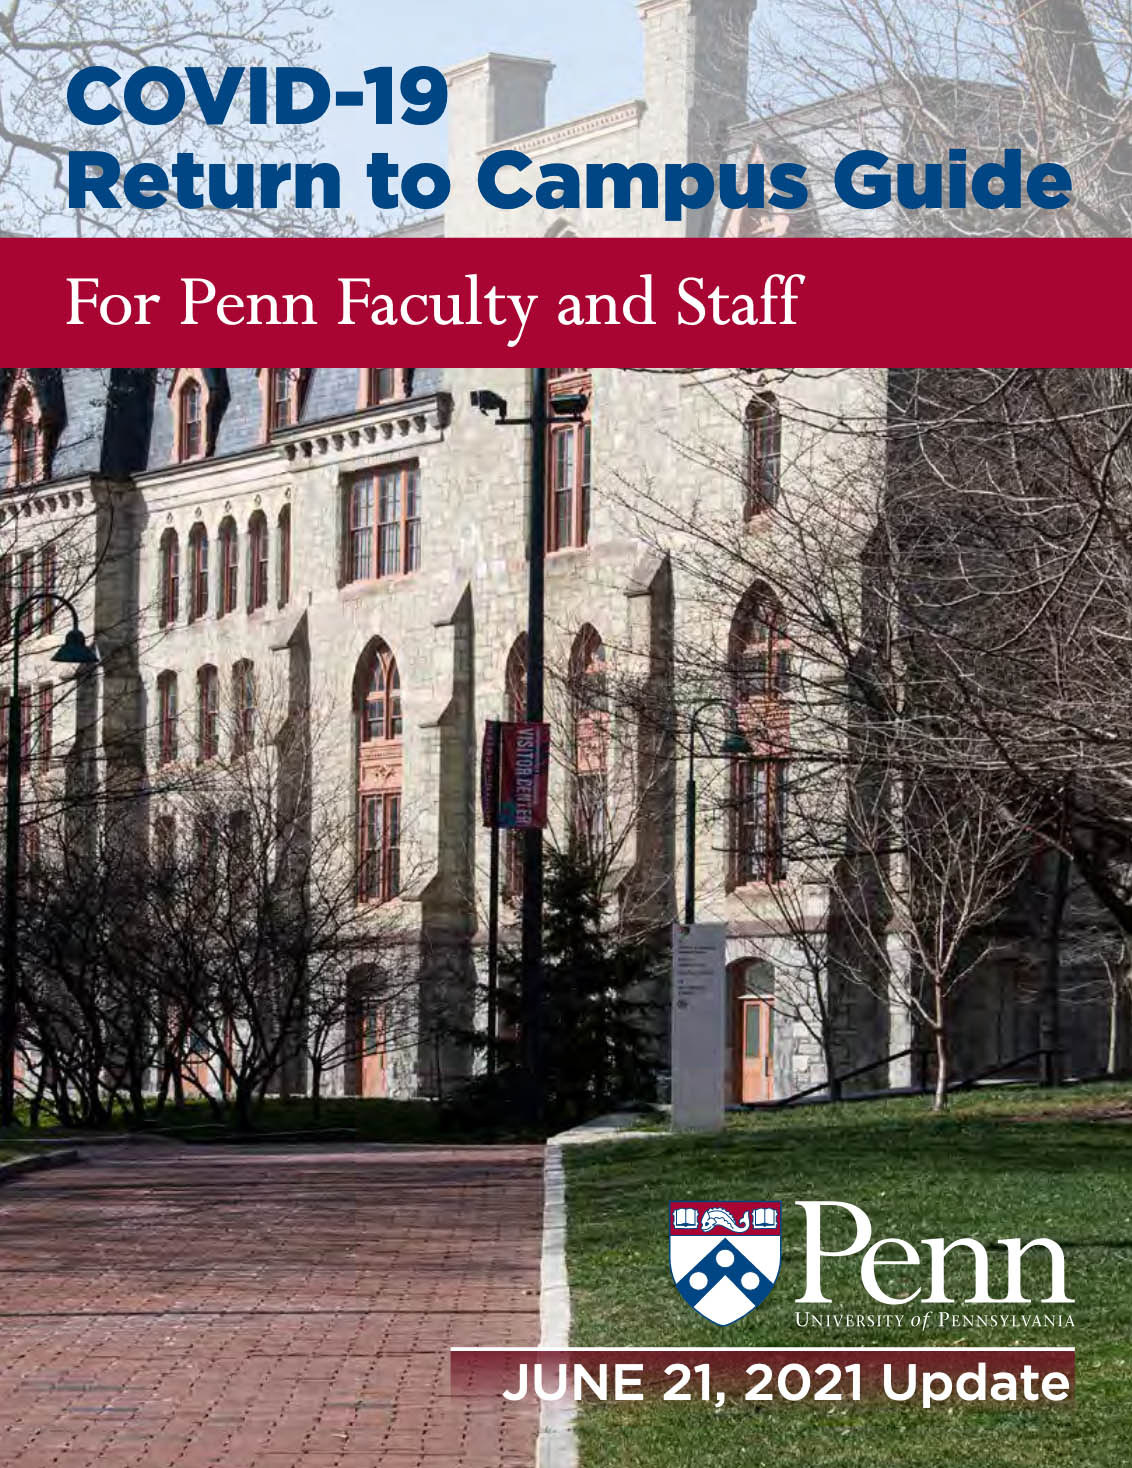 The cover of the Penn HR Return to Work Guide